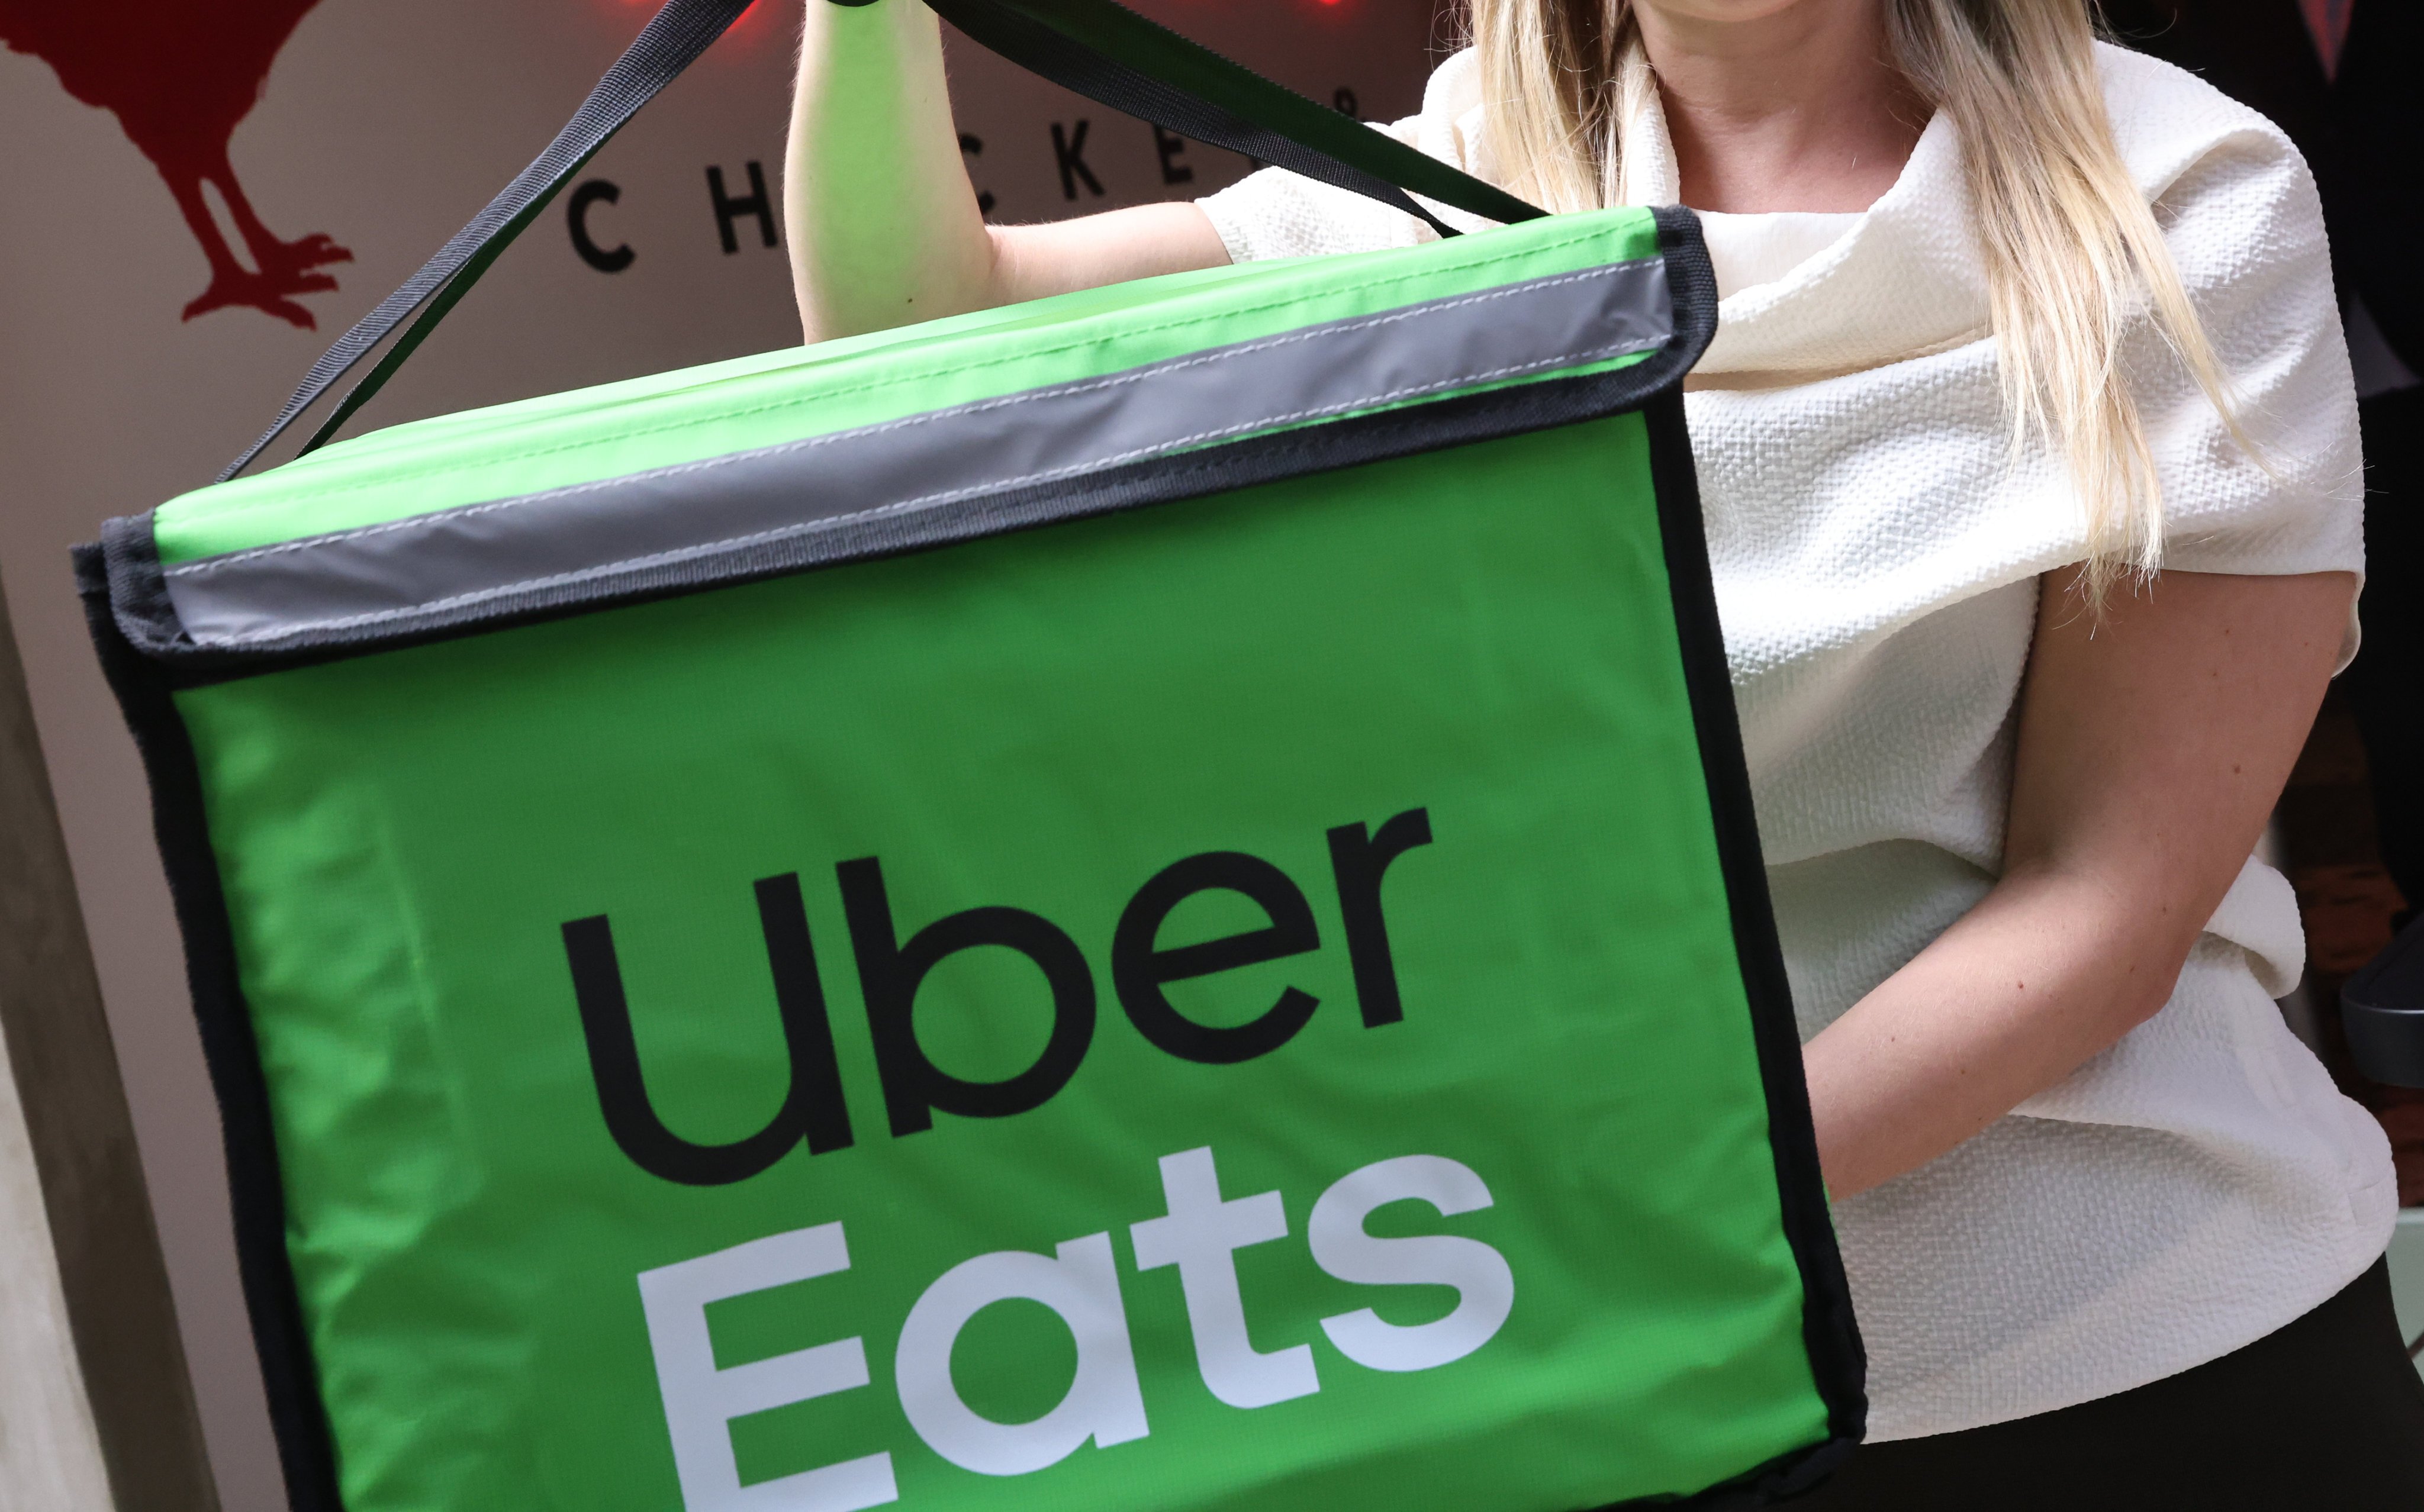 Uber Eats launched in Hong Kong in 2016. Photo: K. Y. Cheng